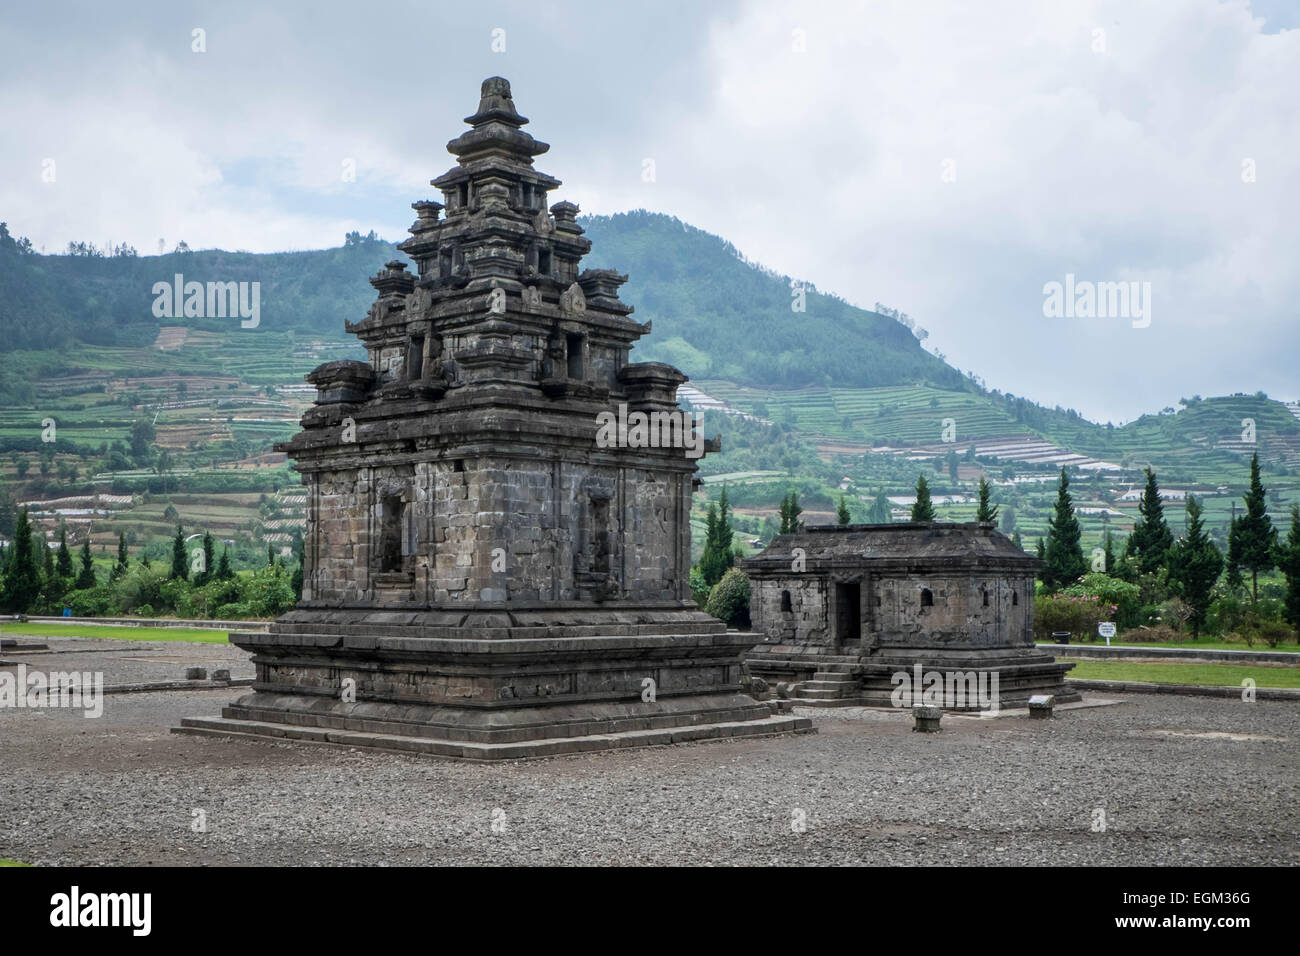 Ancient Hindu temple on the Dieng plateau, Indonesia Stock Photo